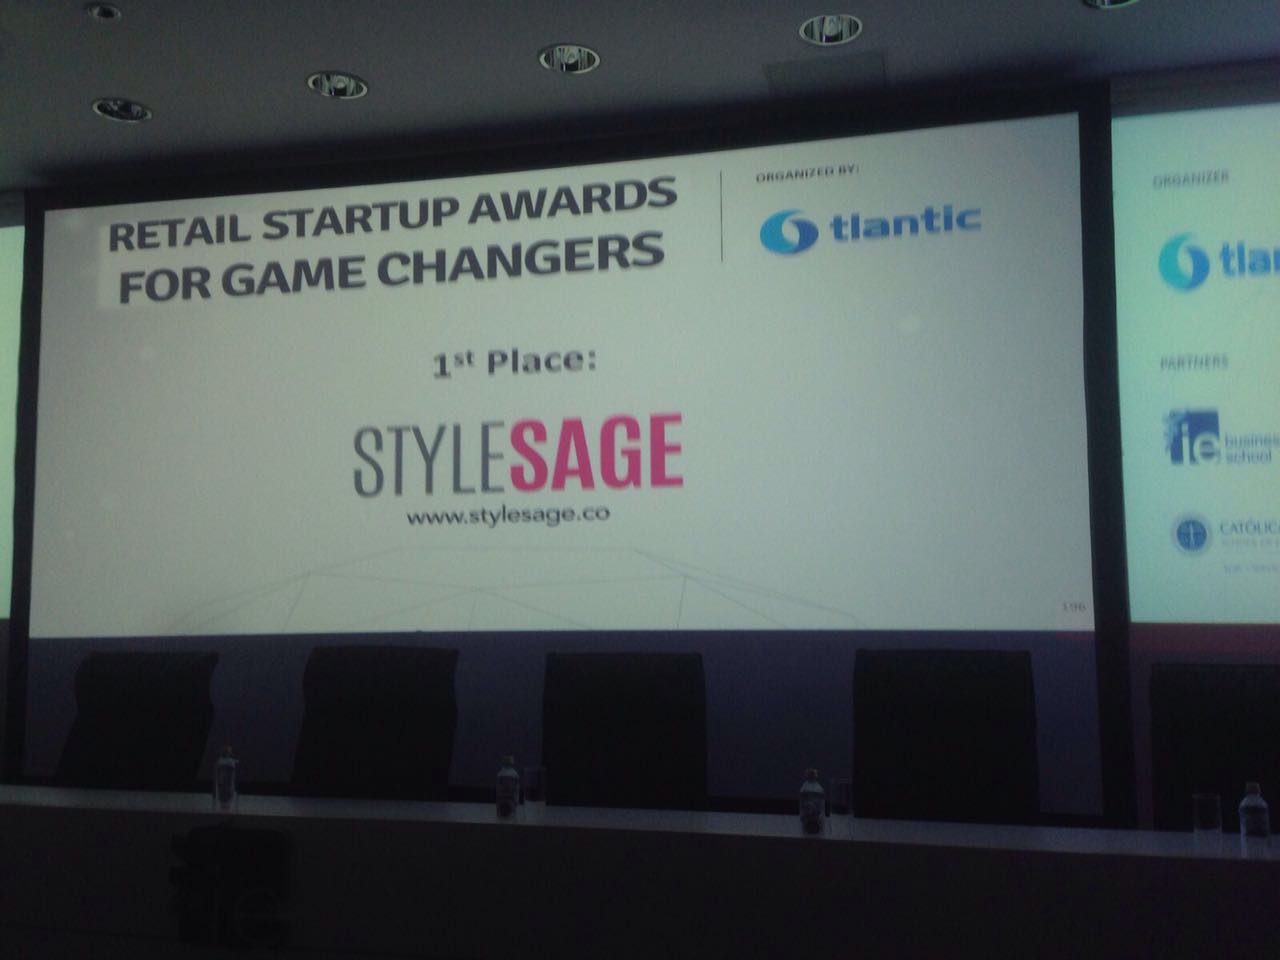 Retail Startup Awards for Game Changers: 1st Prize goes to StyleSage!